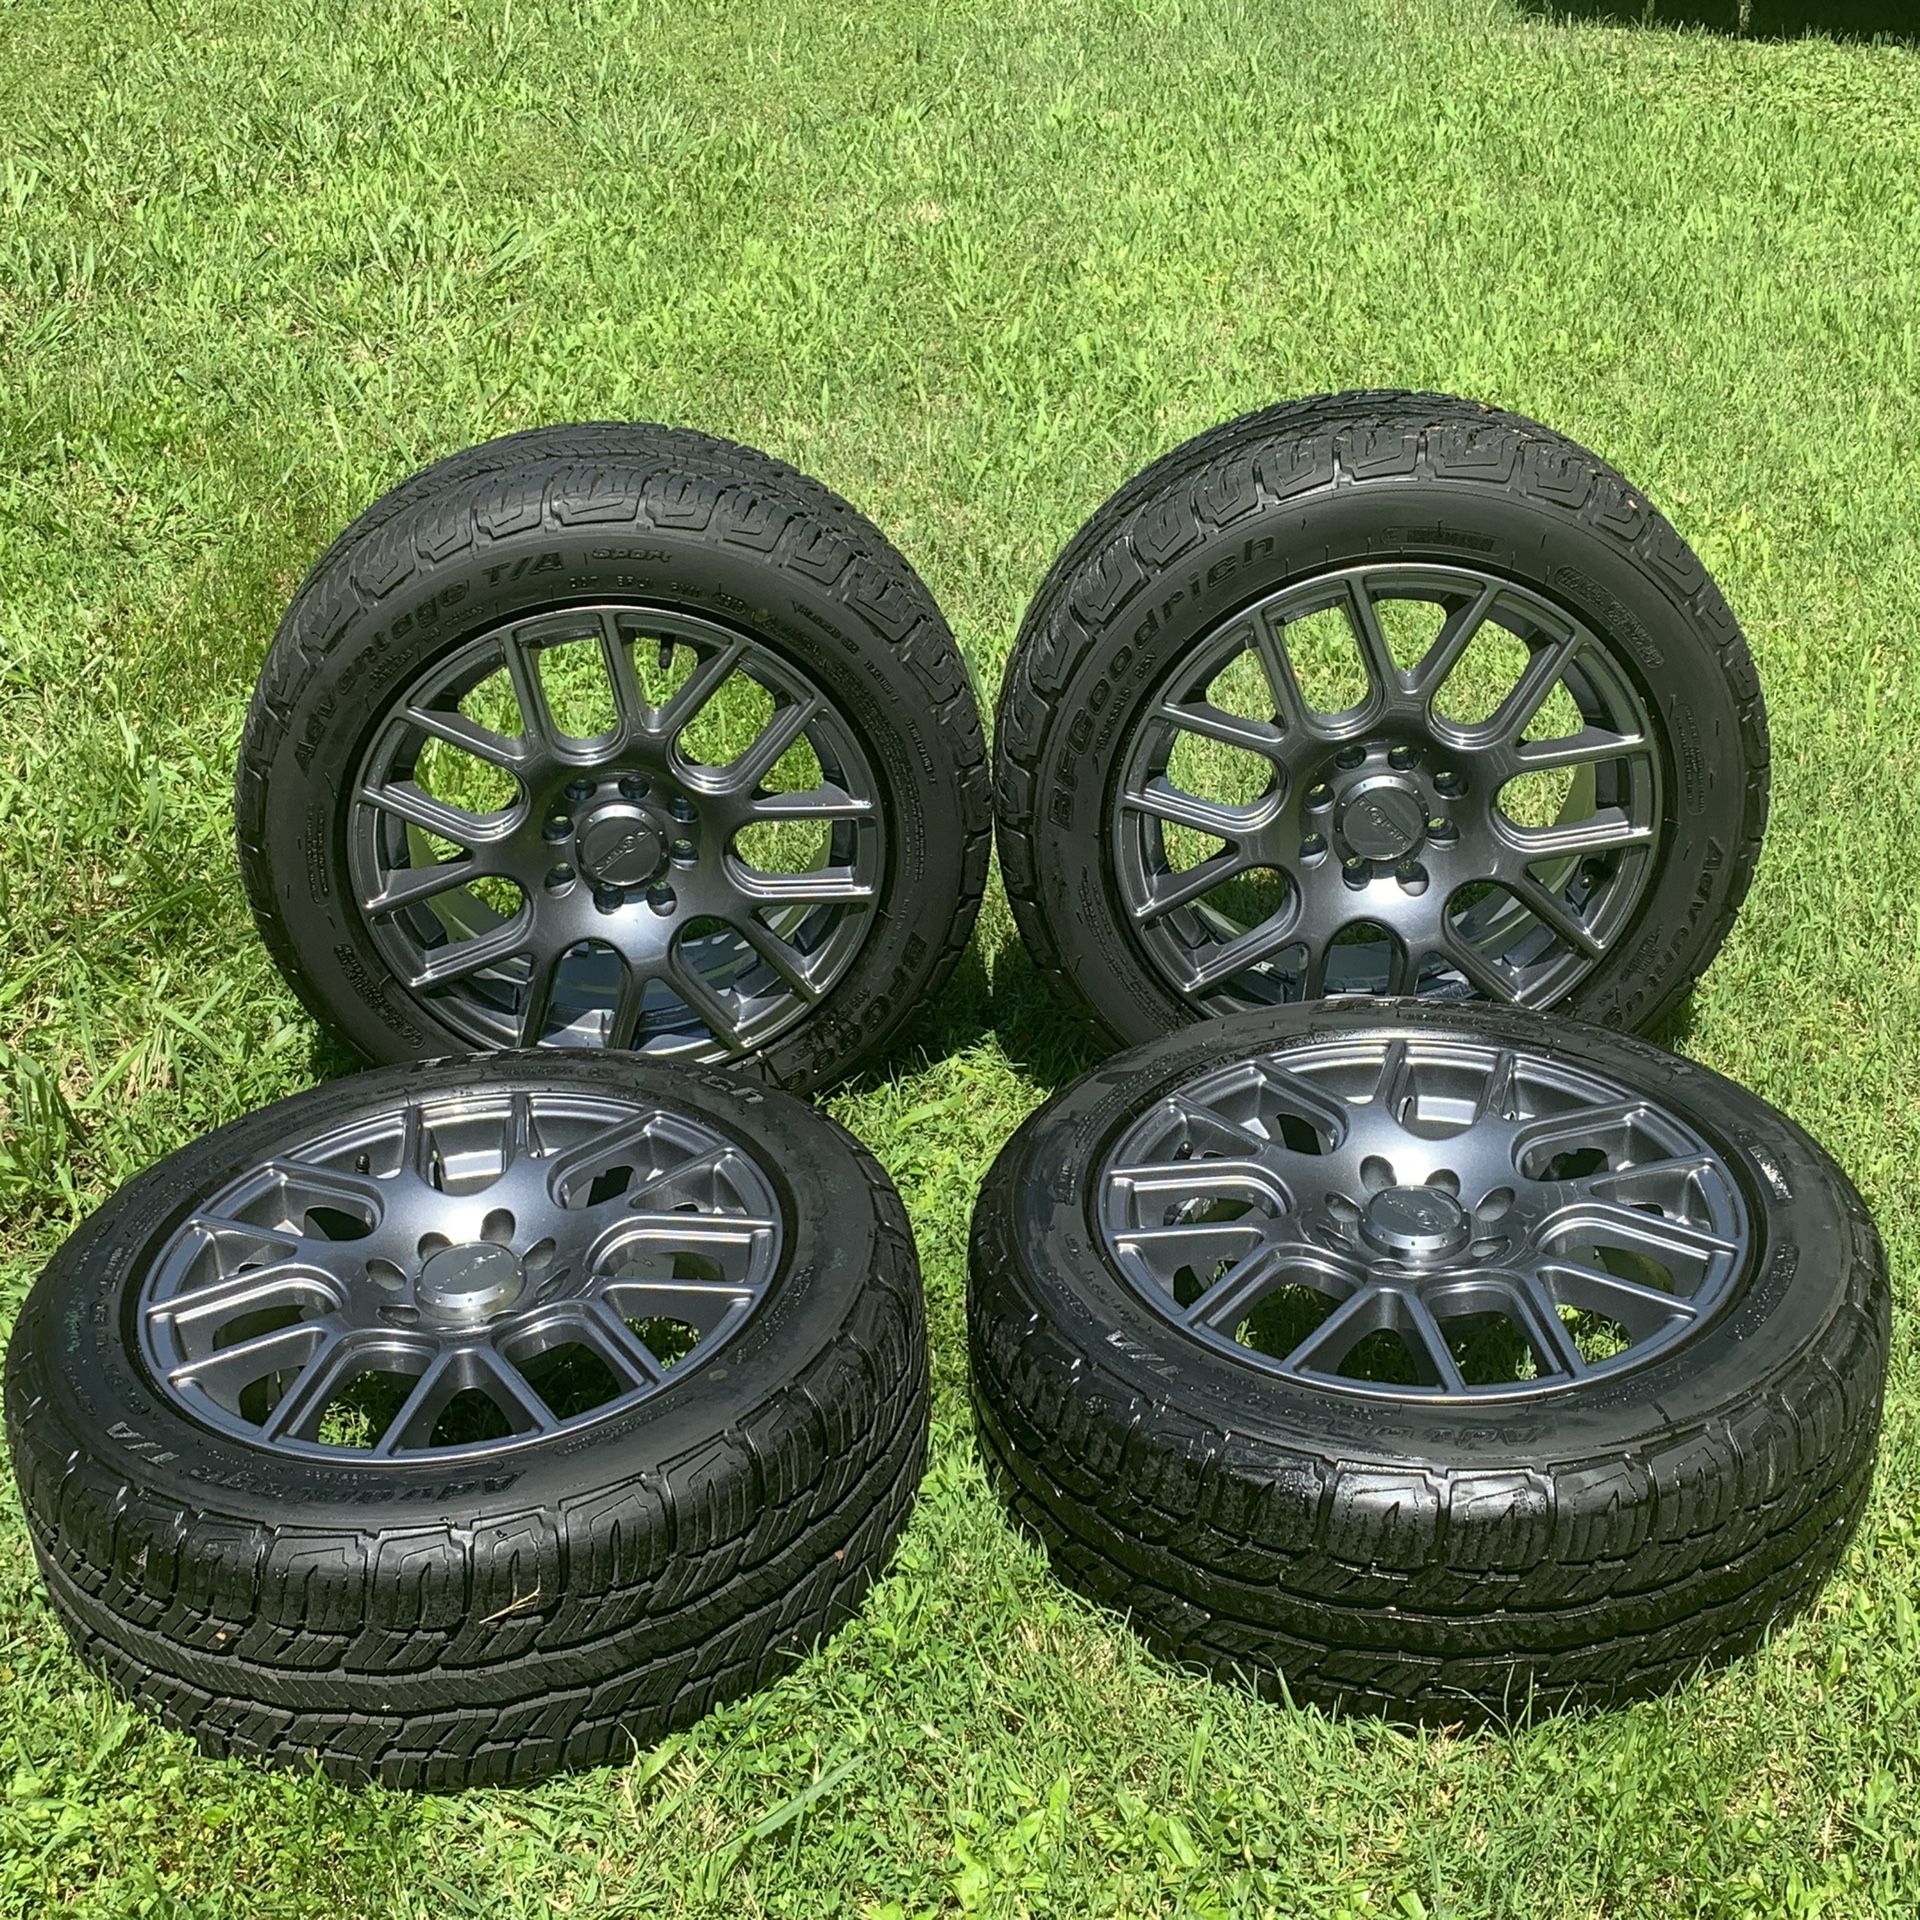 Vision rims , Advantage T/A BF Goodrich tires ,195/55R15 .4 unilug rims and tires like new ,less than 500 miles. will fit a ton of different cars !!